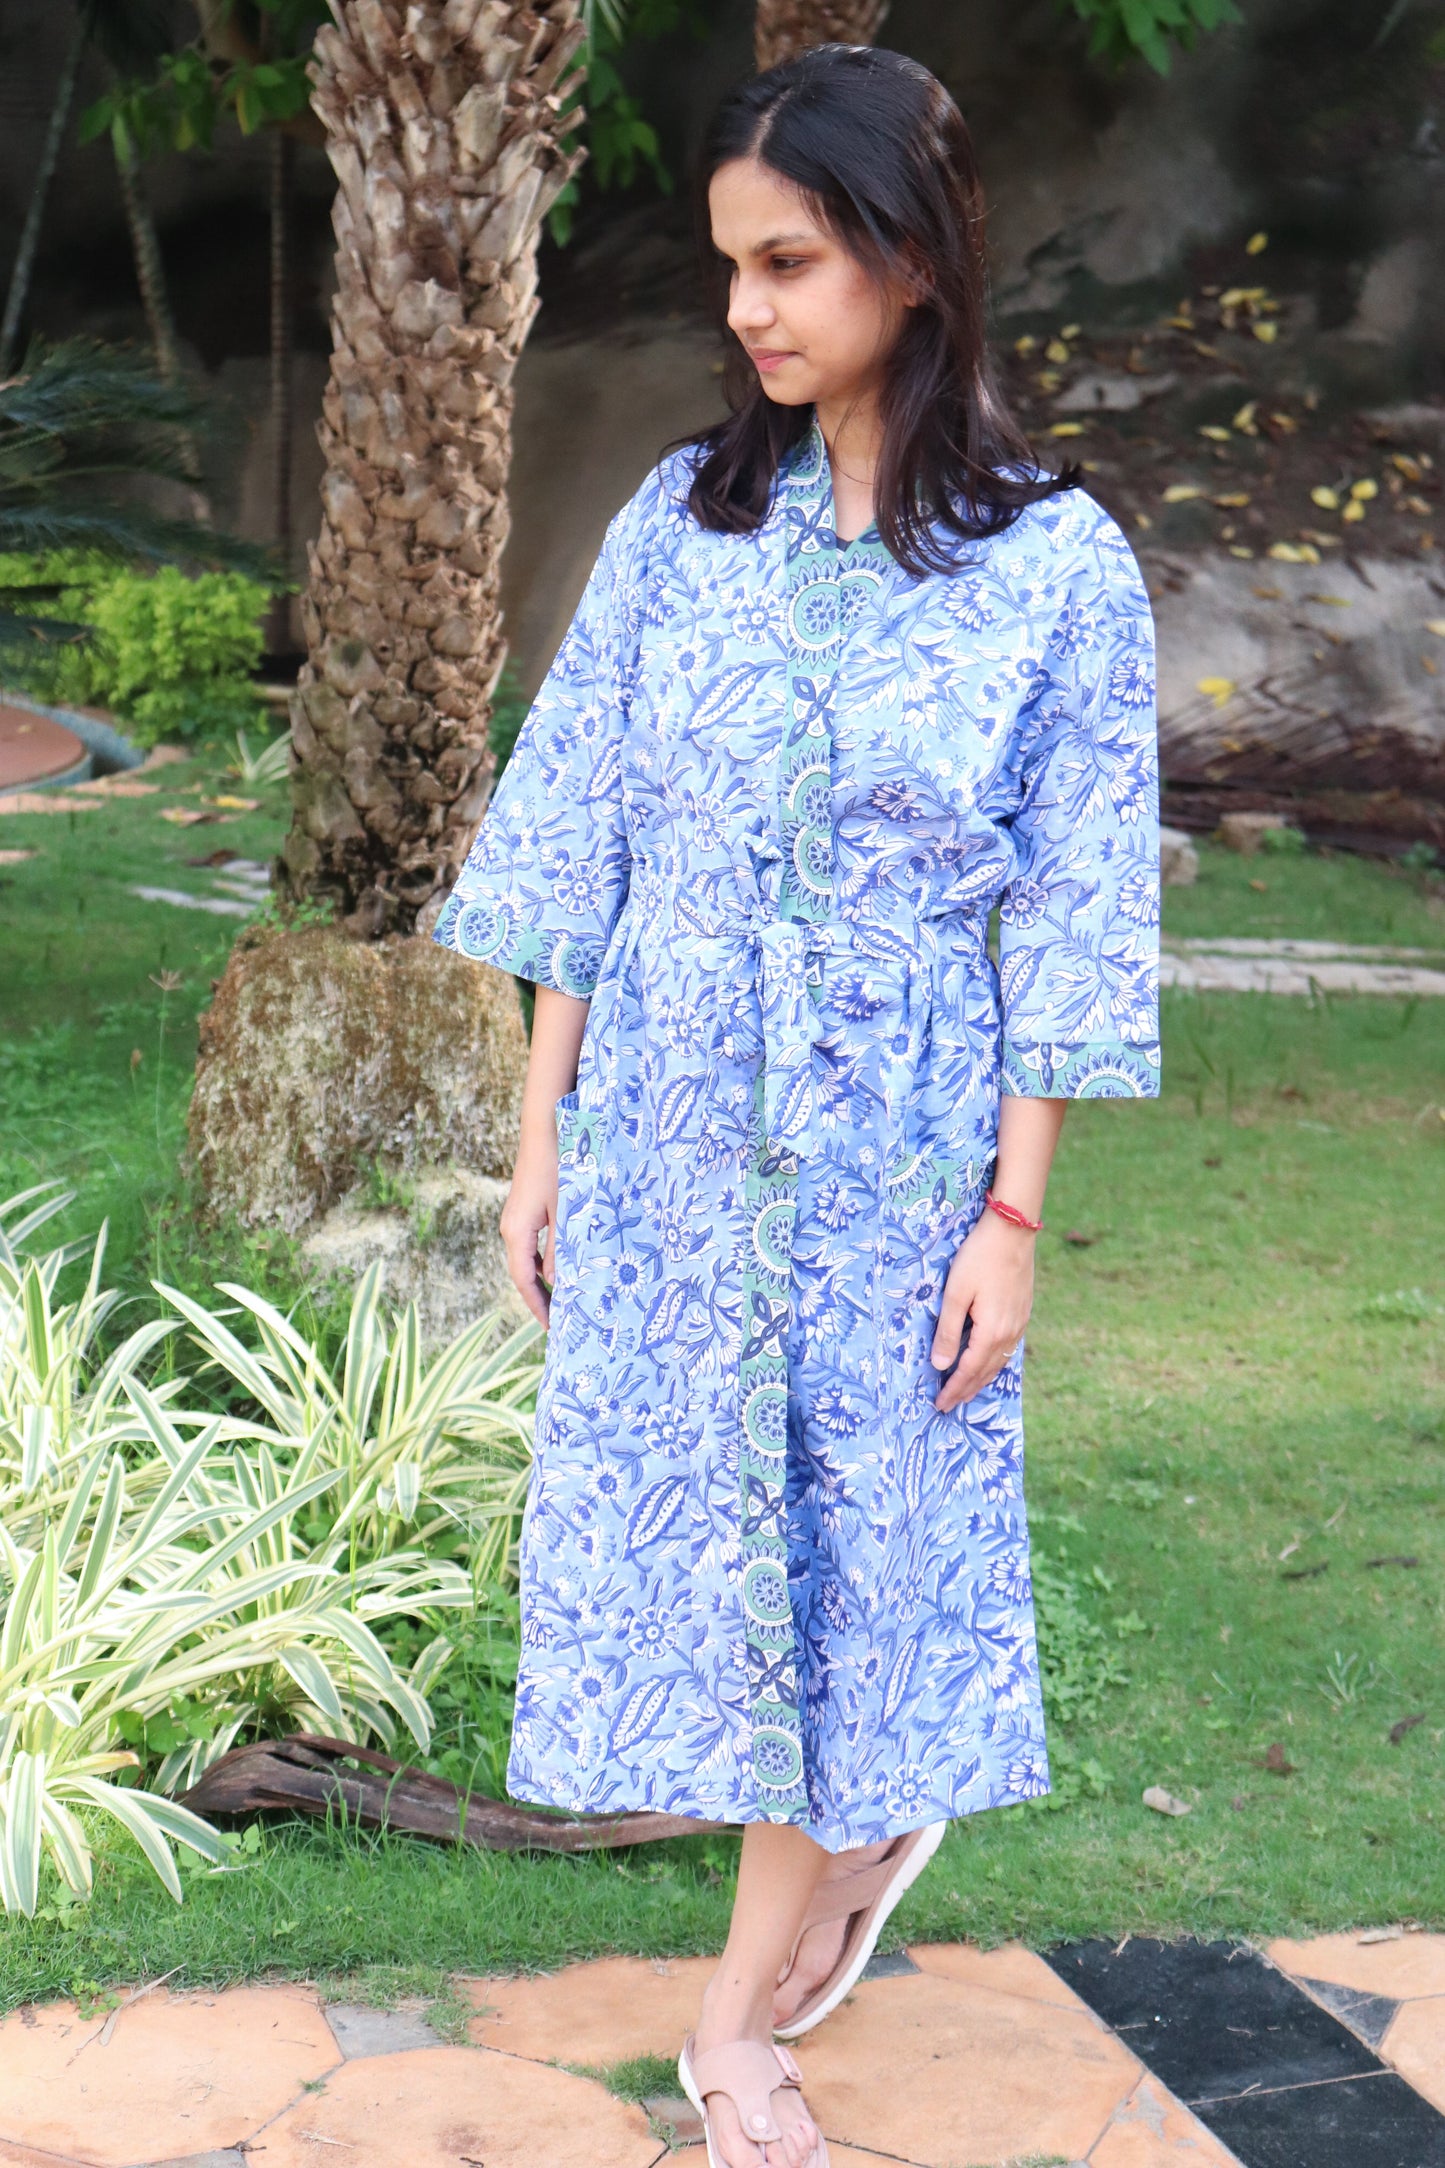 Blue floral Cotton robe for women - Block print robes - beach cover up - Blue floral